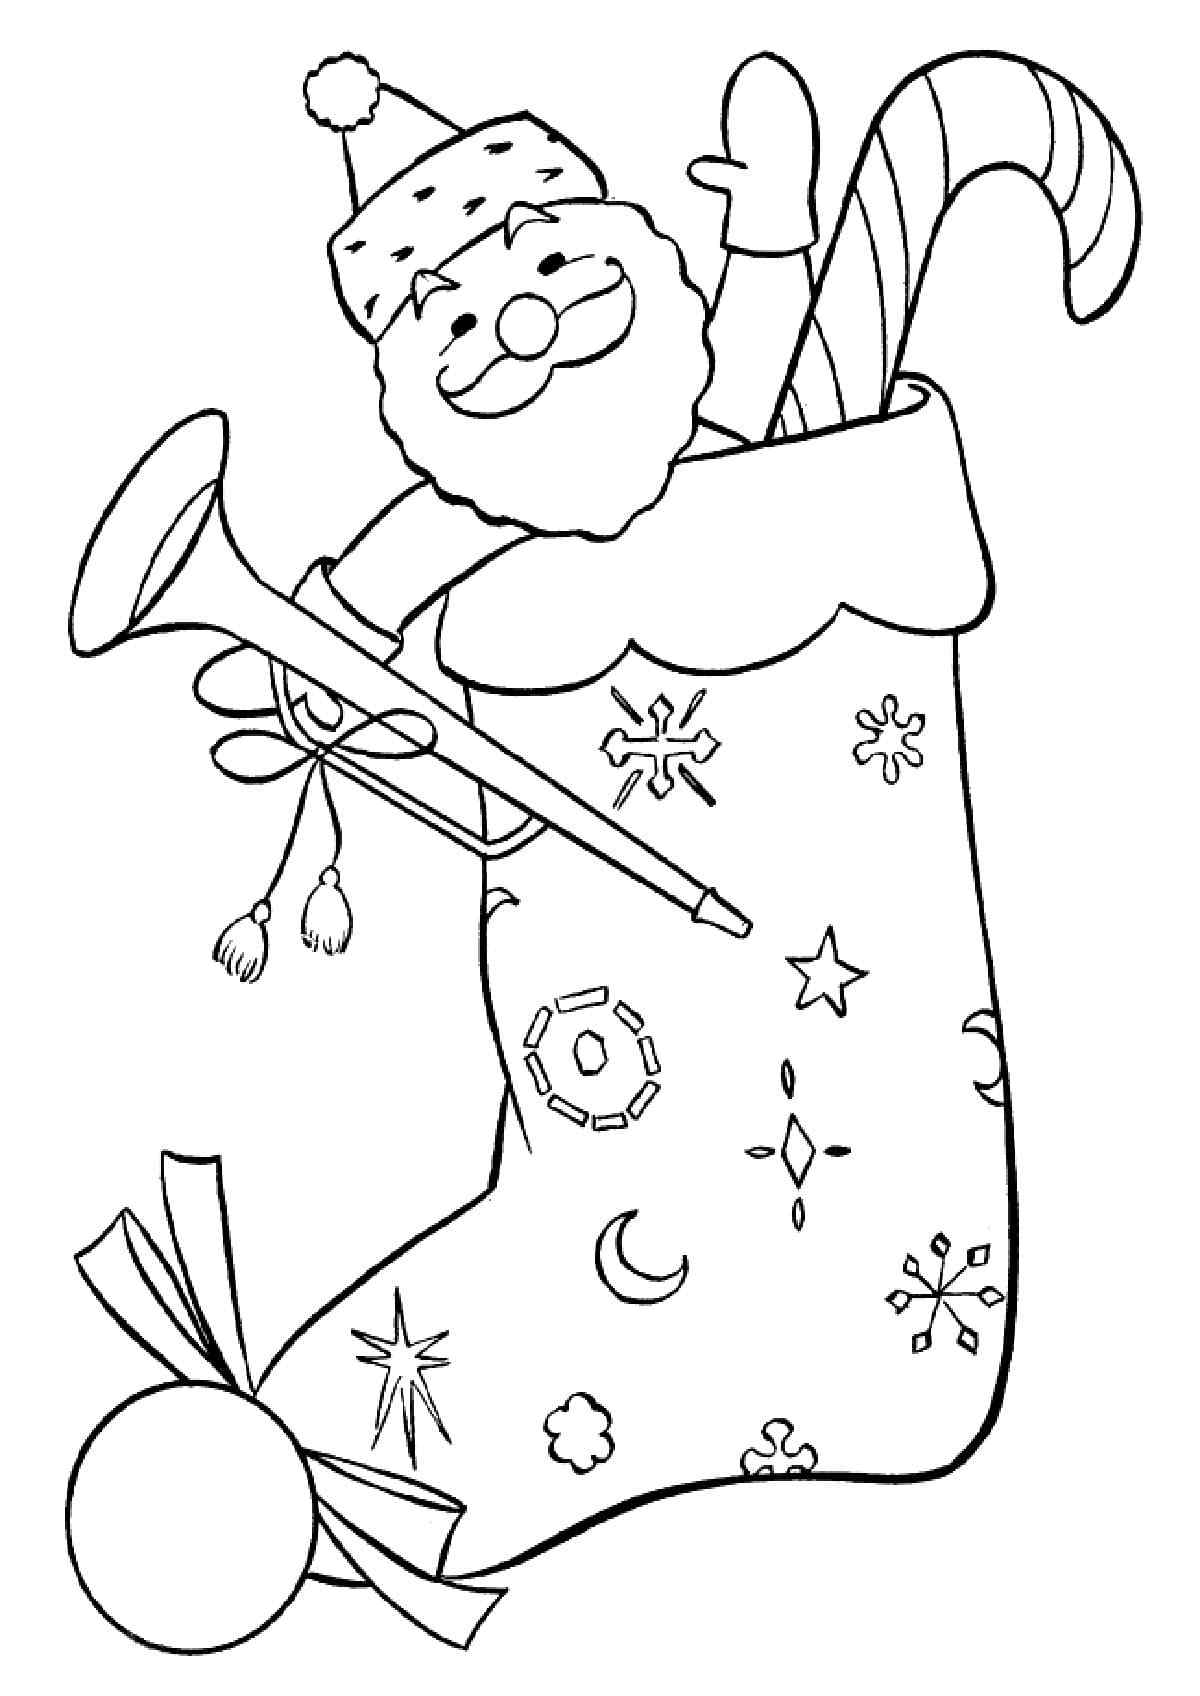 Gifts Are Hidden In A Christmas Socks Coloring Page